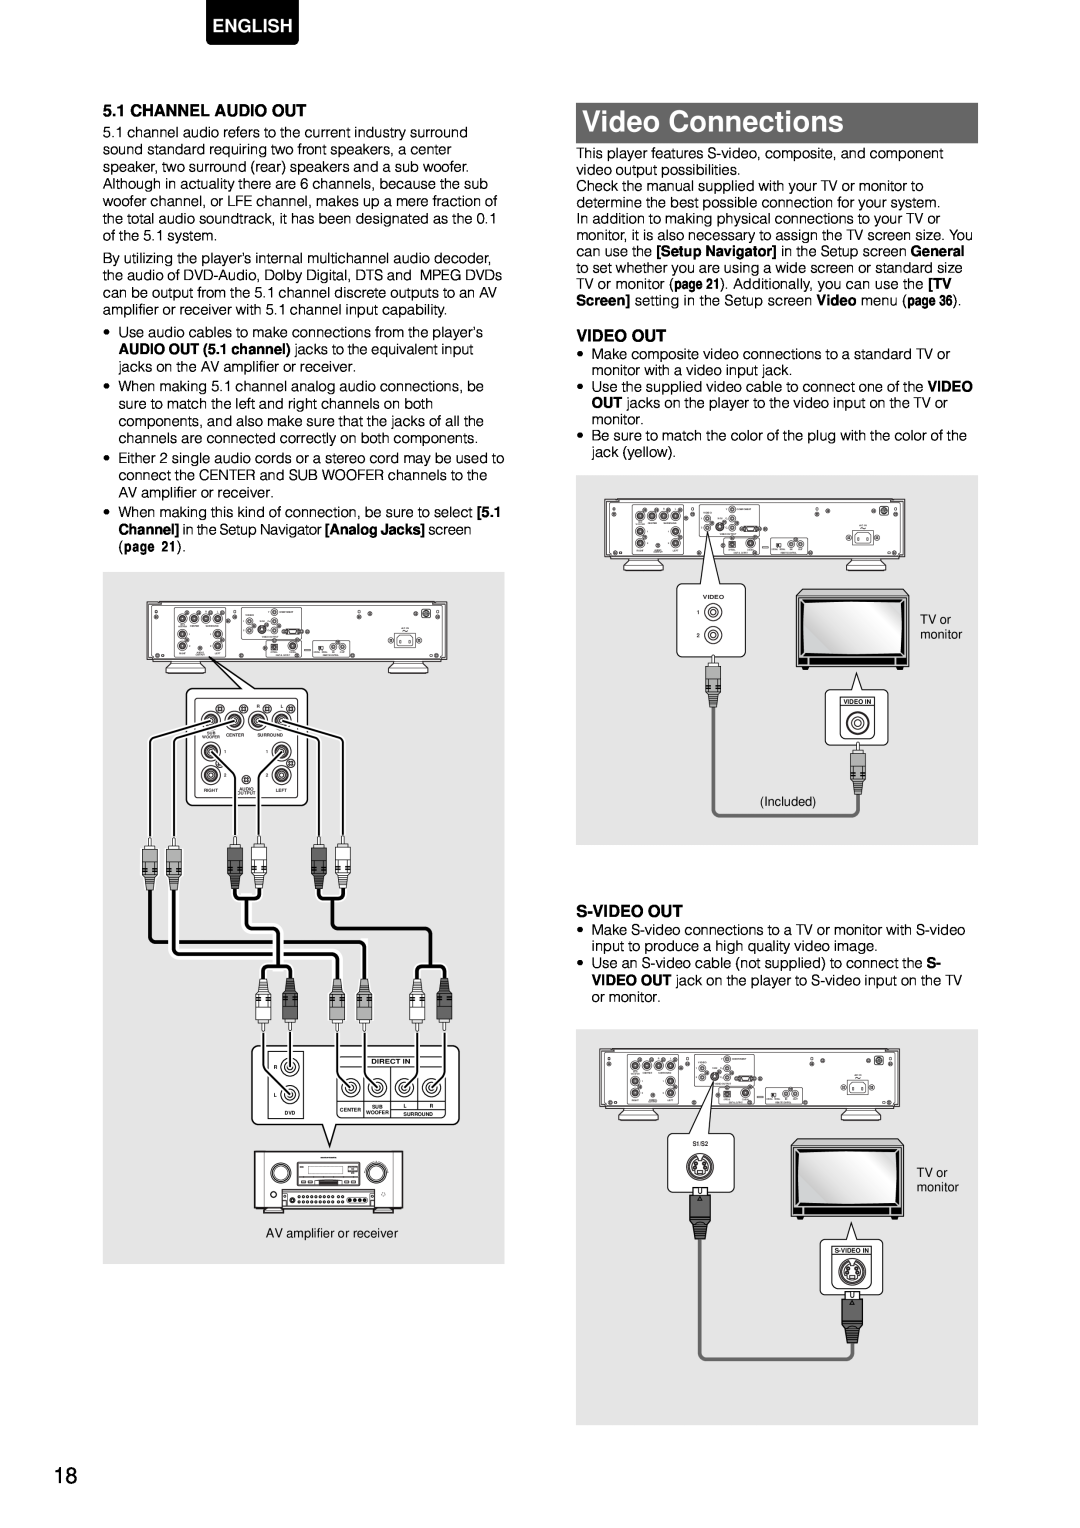 Marantz DV-12S1 manual Video Connections, Channel Audio Out, S-Video Out, English, page 